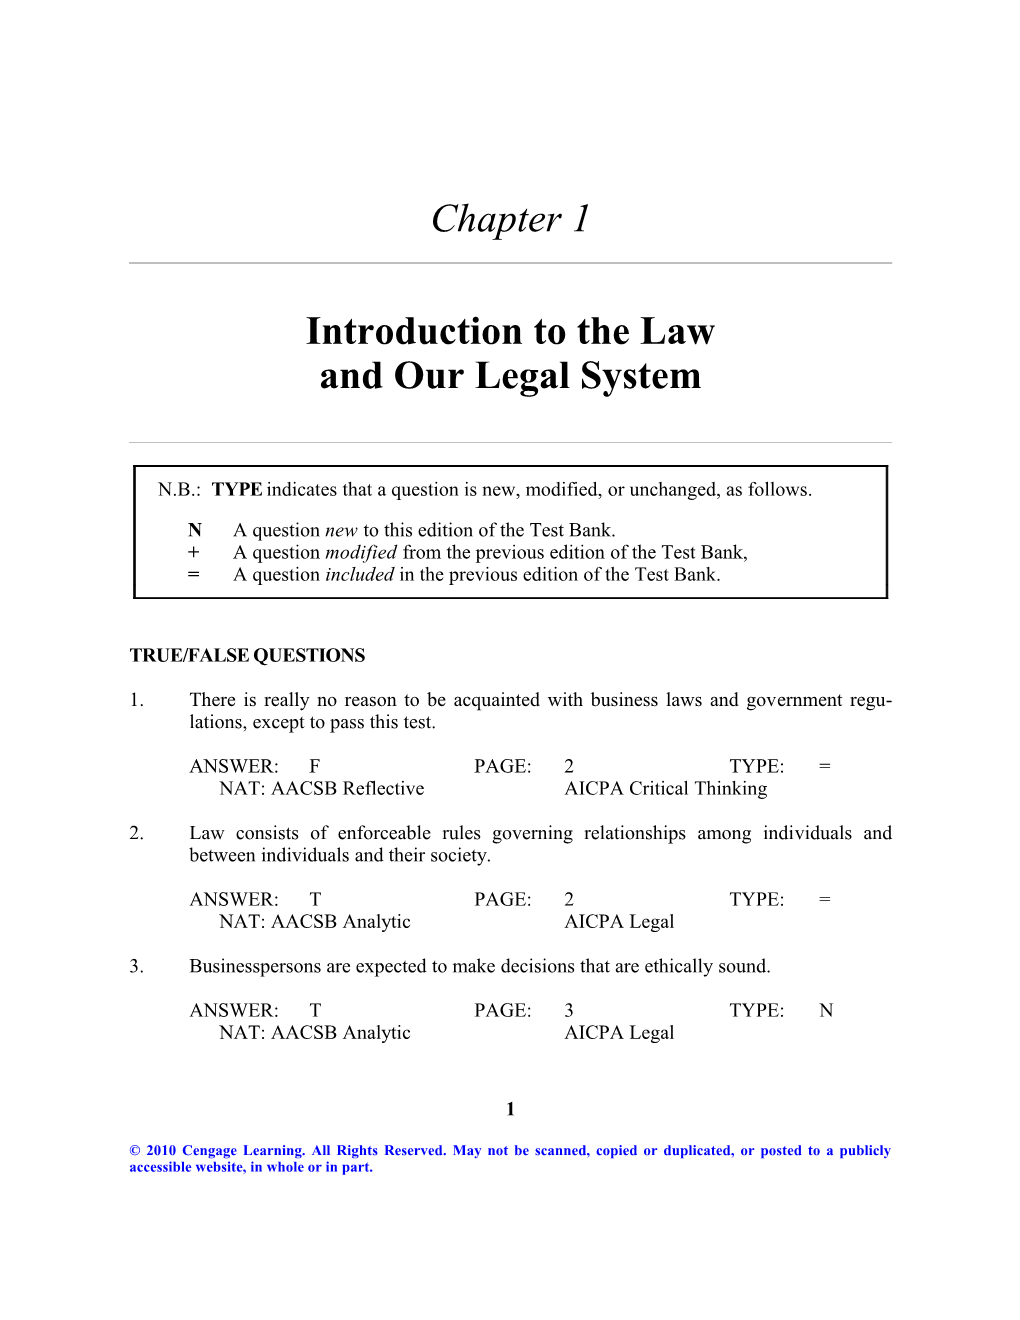 Chapter 1: Introduction to the Law and Our Legal System 1